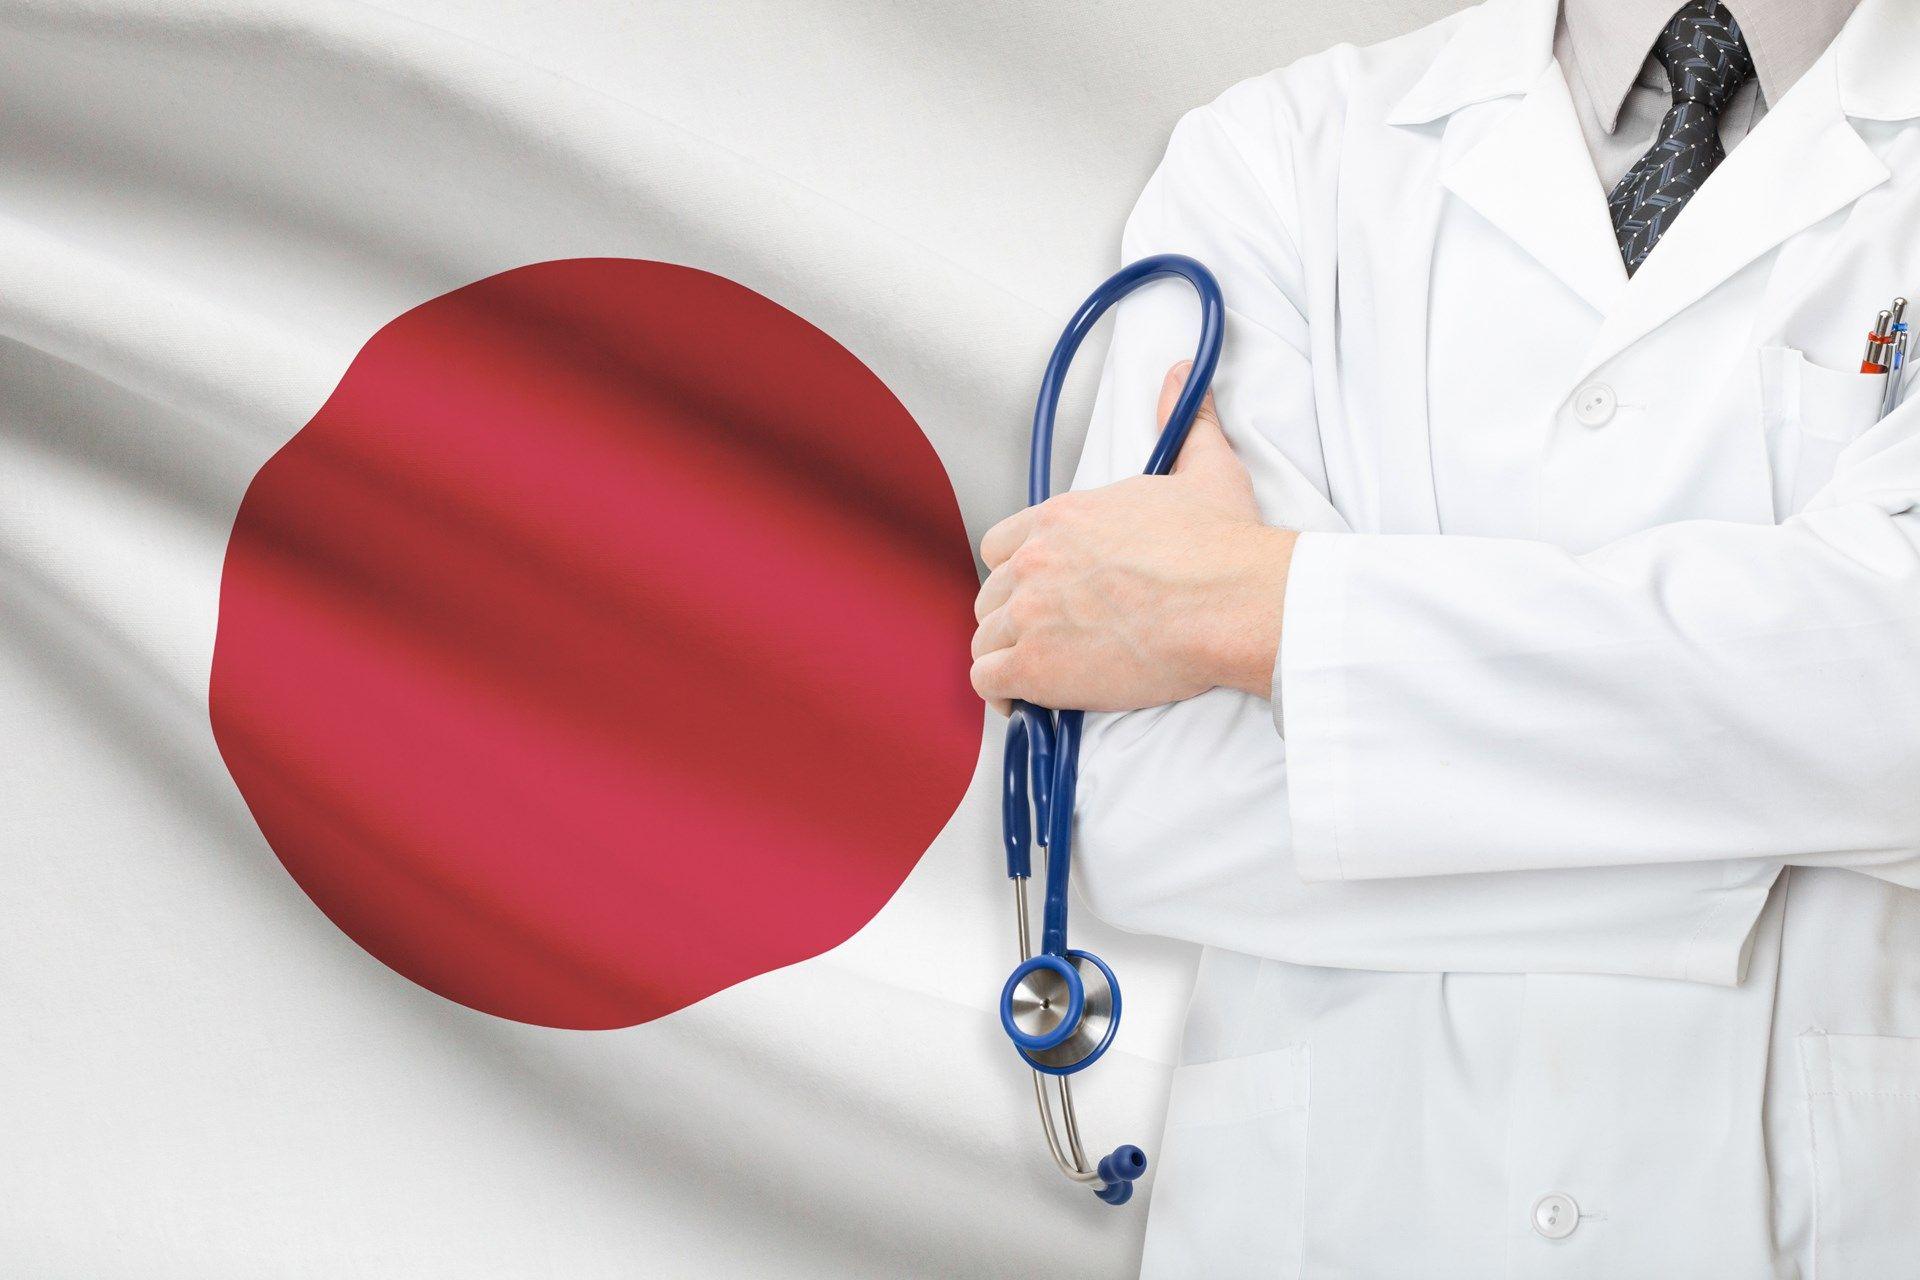 Japan Health Care Logo - The FDA Is Lethally Backward, Especially Compared to Japan